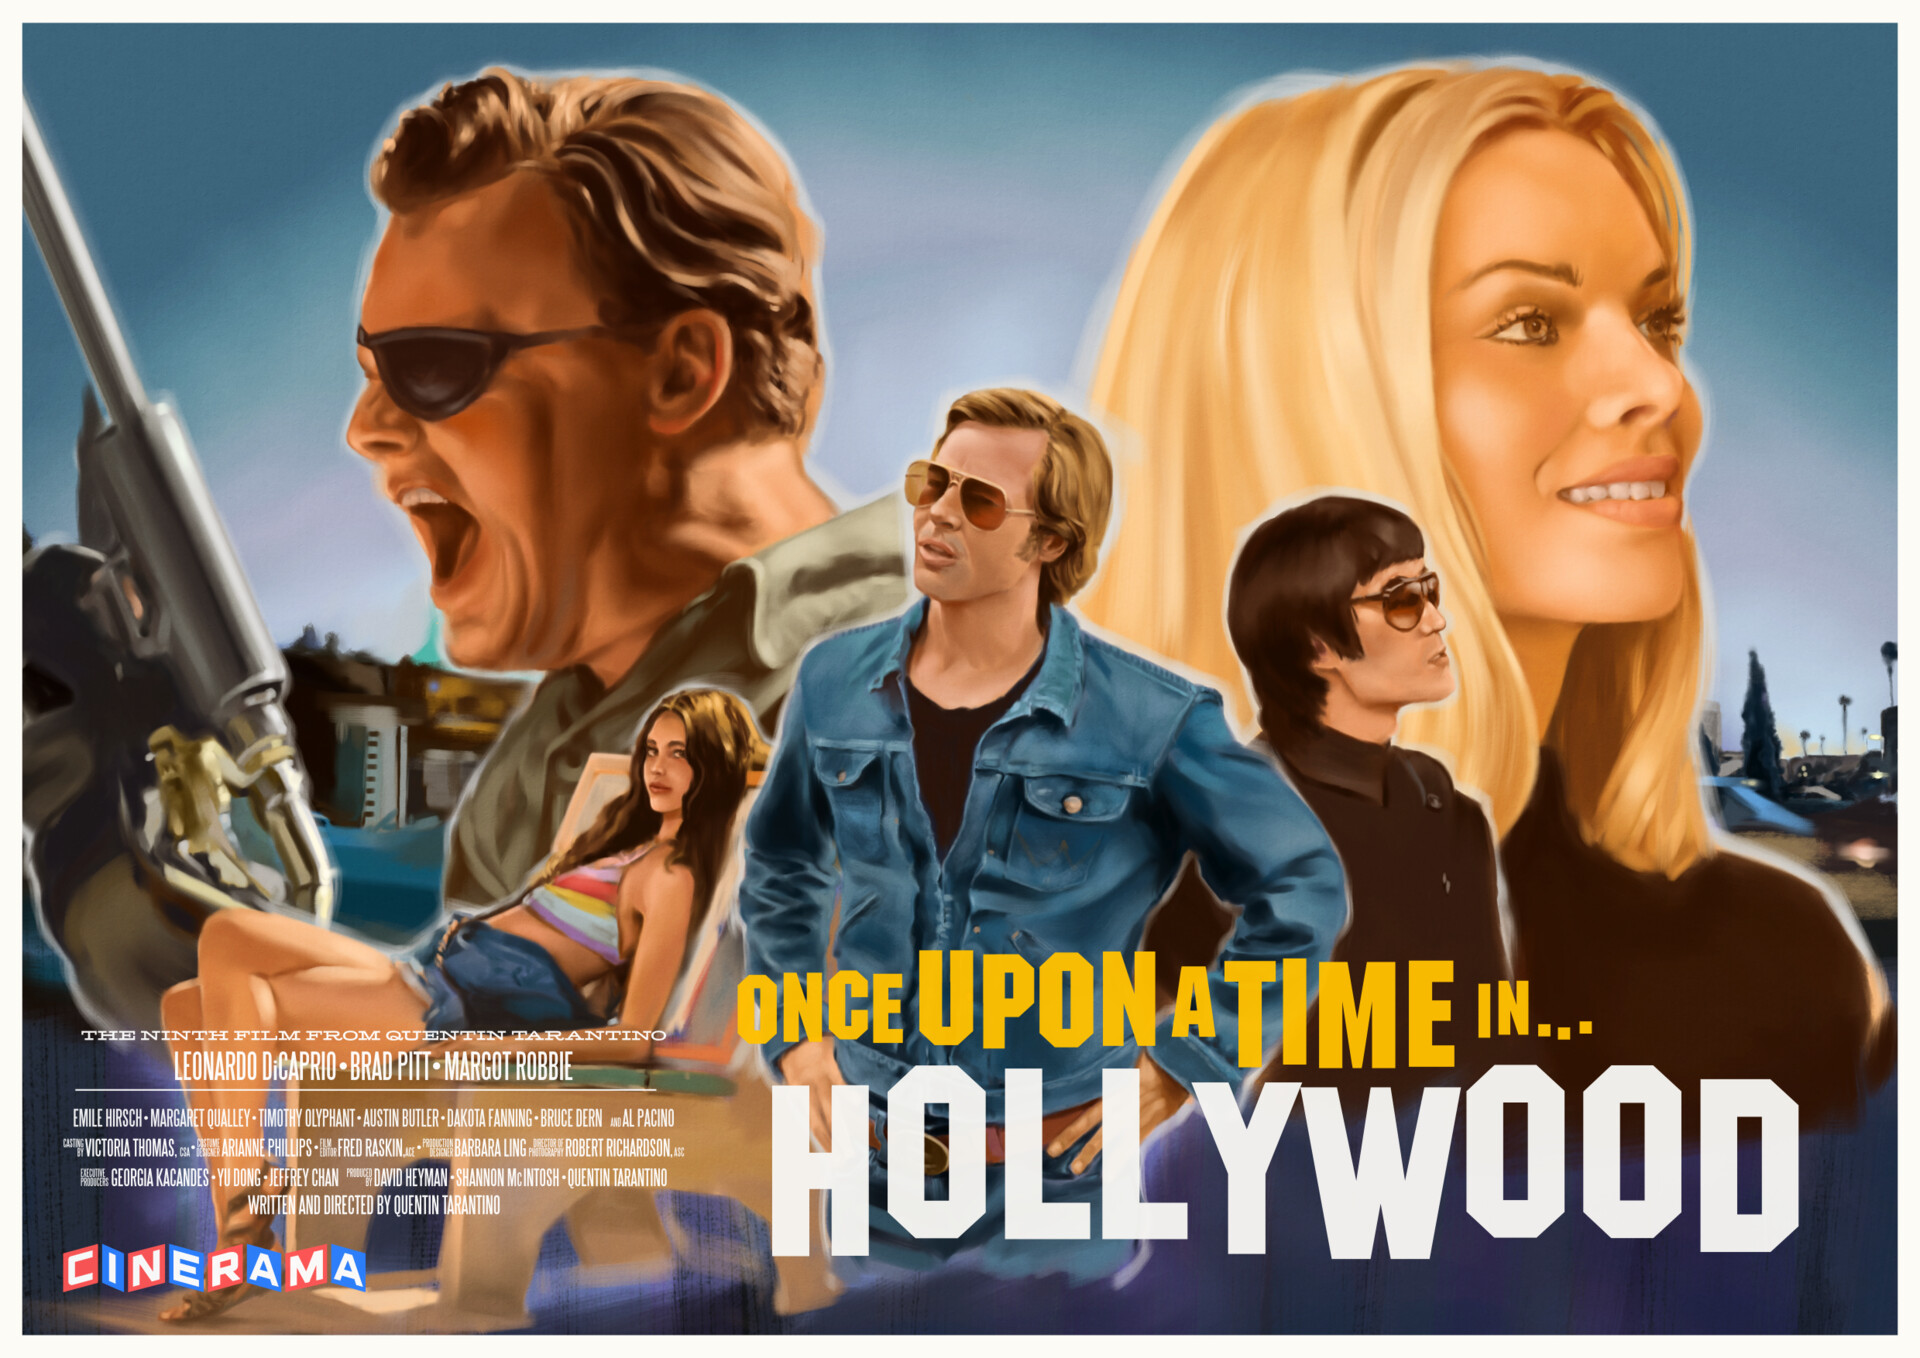 ArtStation - Once upon a time in...Hollywood (personal piece)